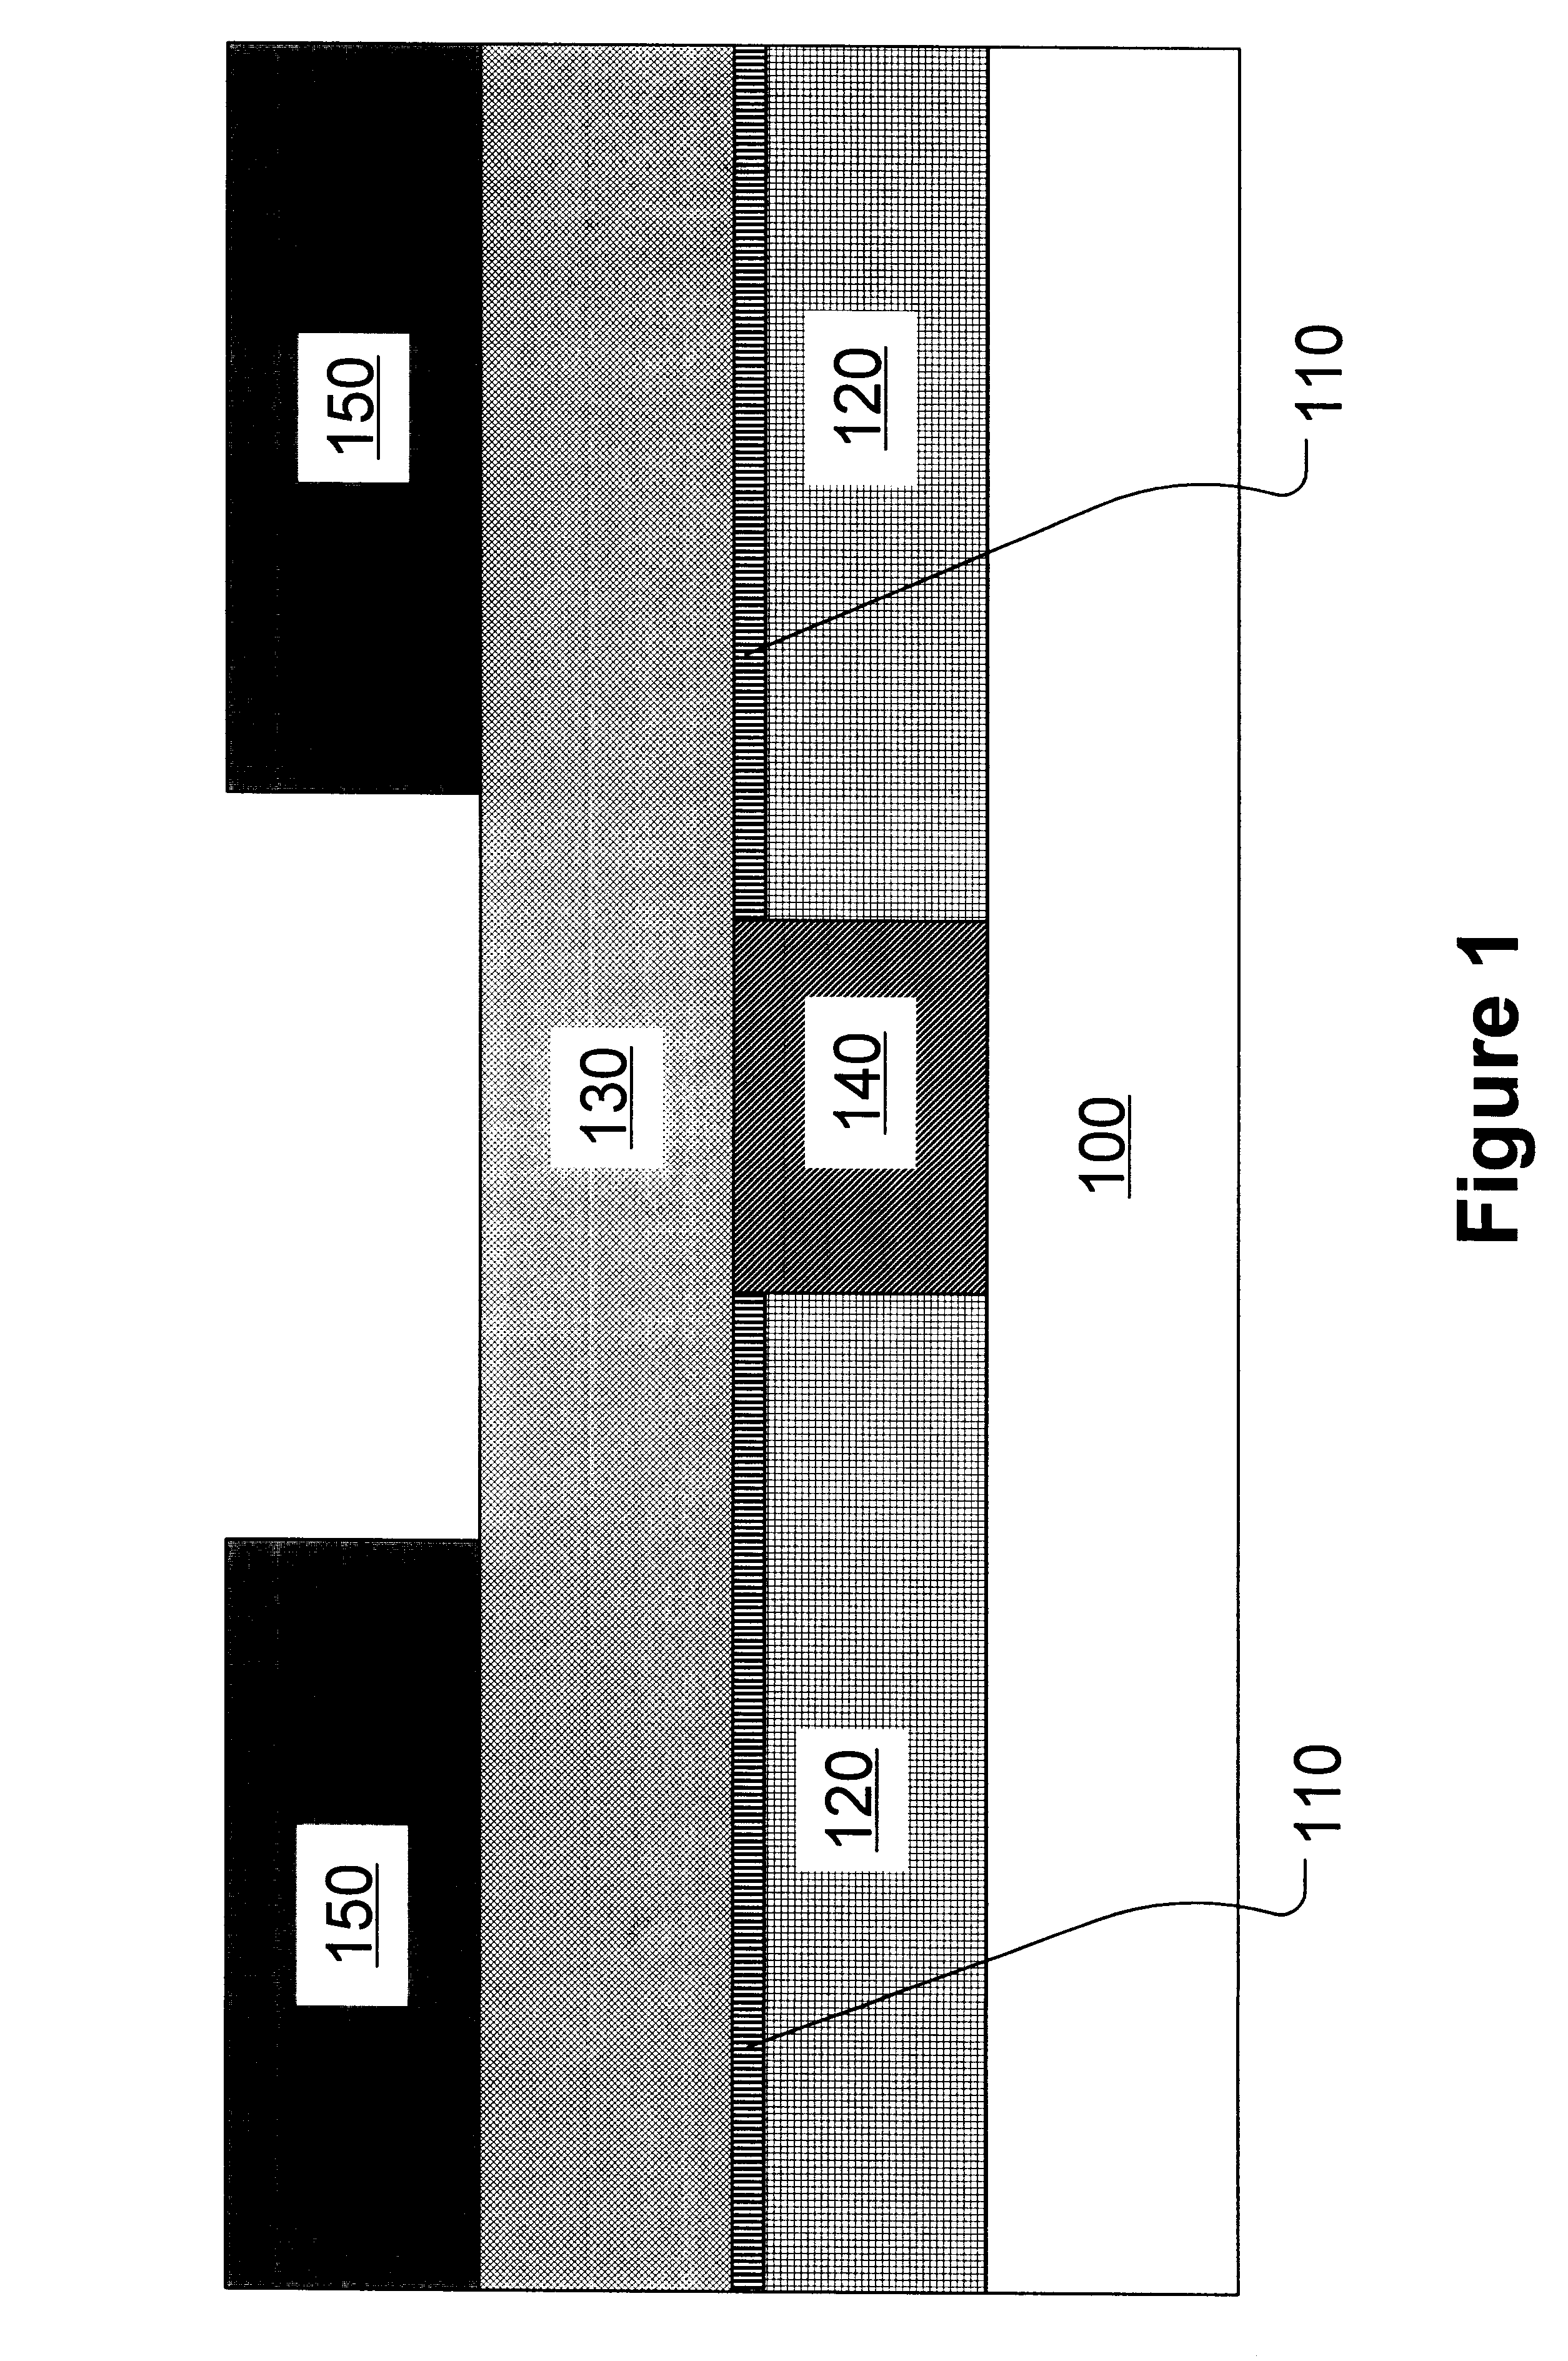 Method of fabricating copper-based semiconductor devices using a sacrificial dielectric layer and an unconstrained copper anneal